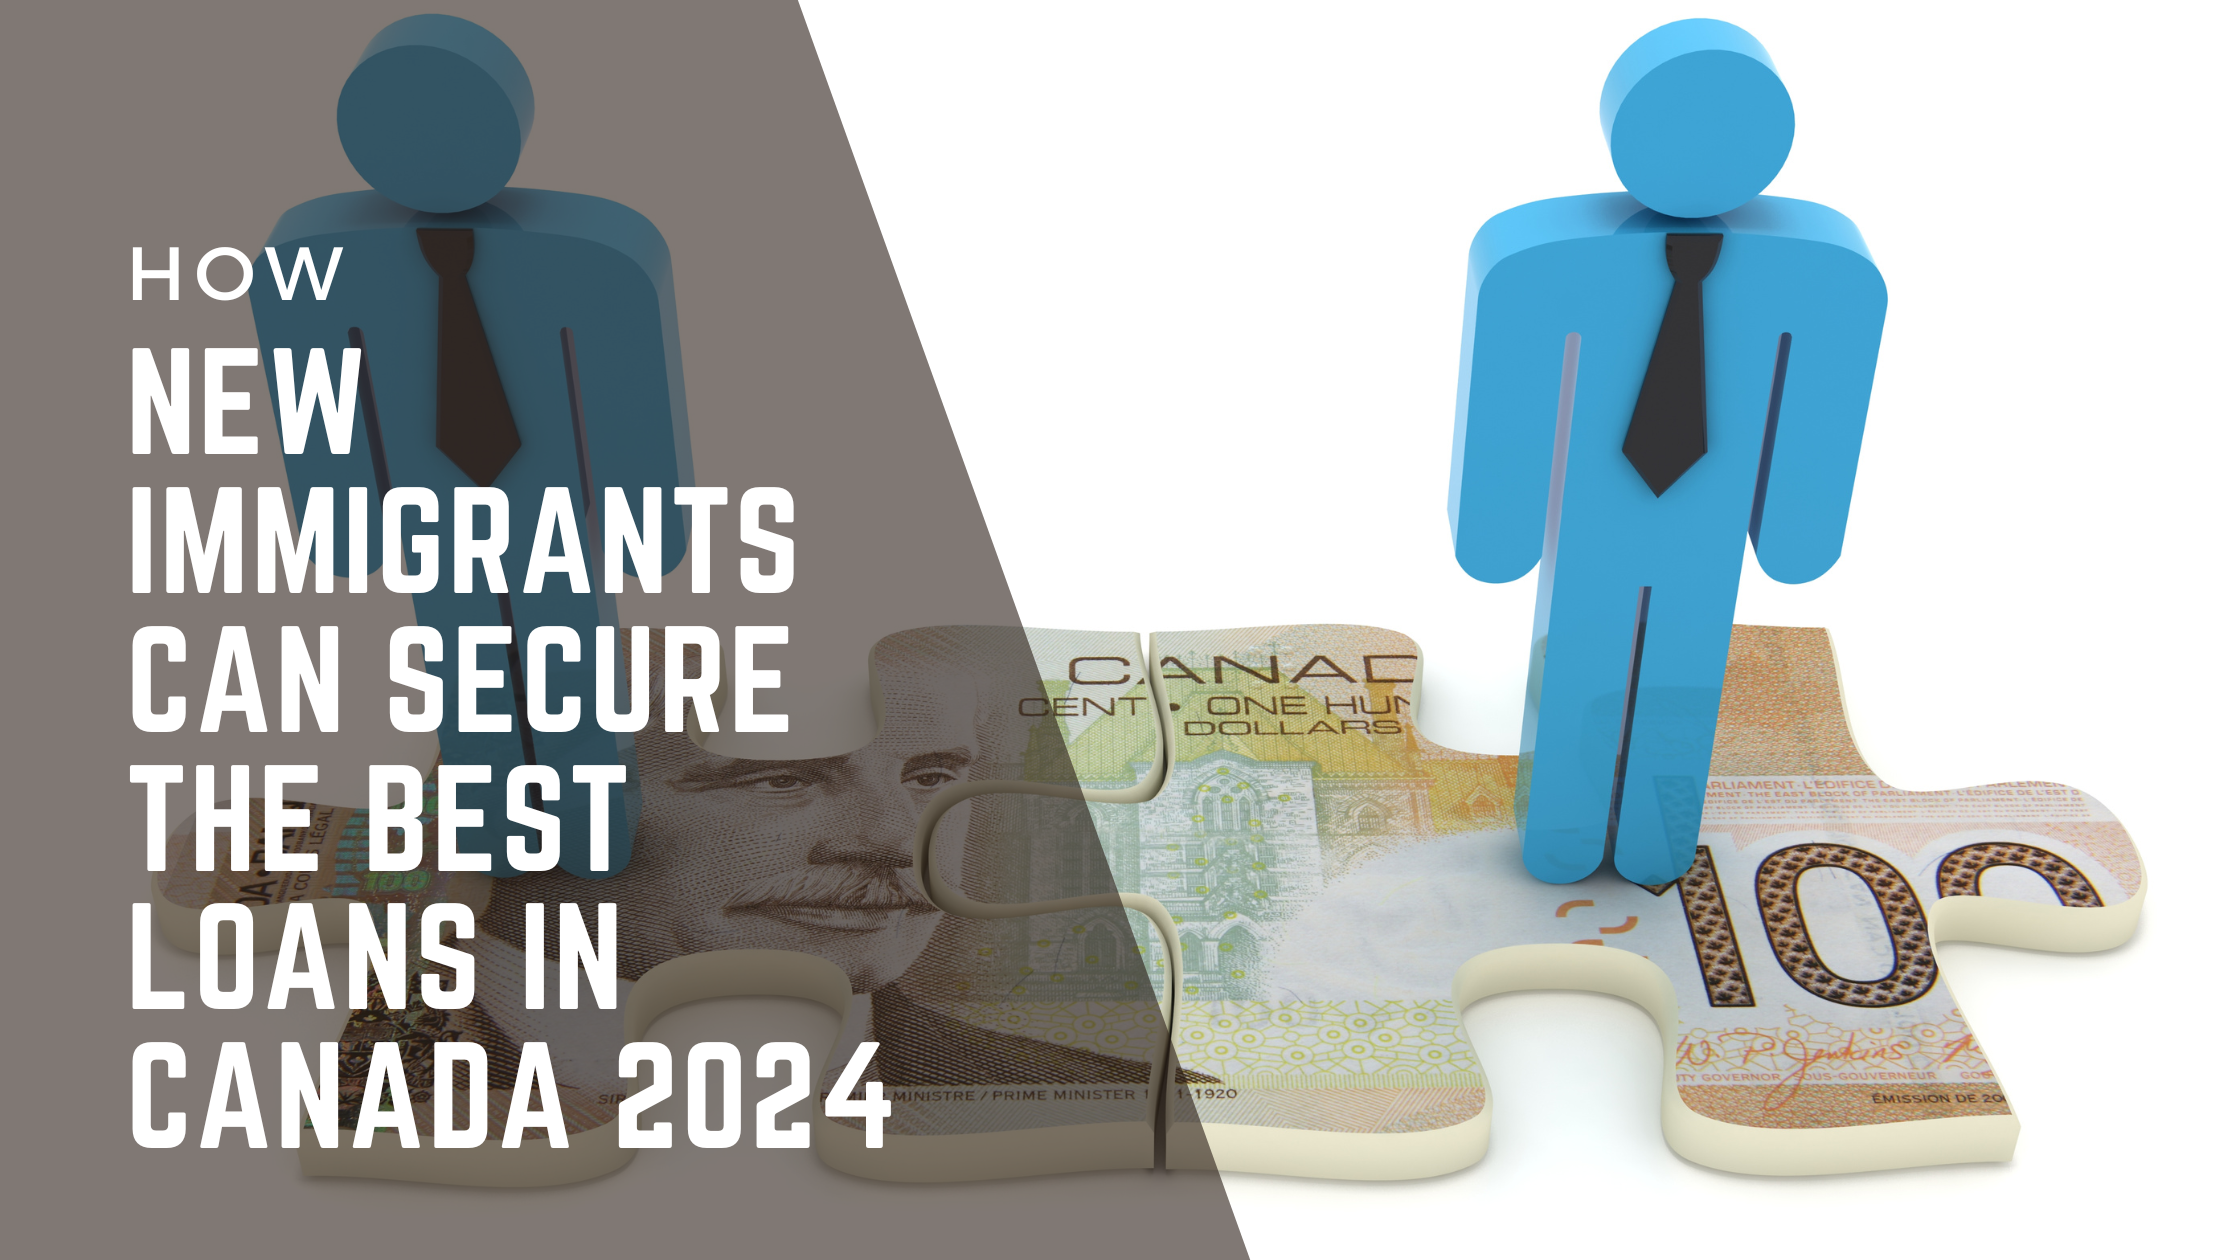 How New Immigrants Can Secure The Best Loans in Canada 2024